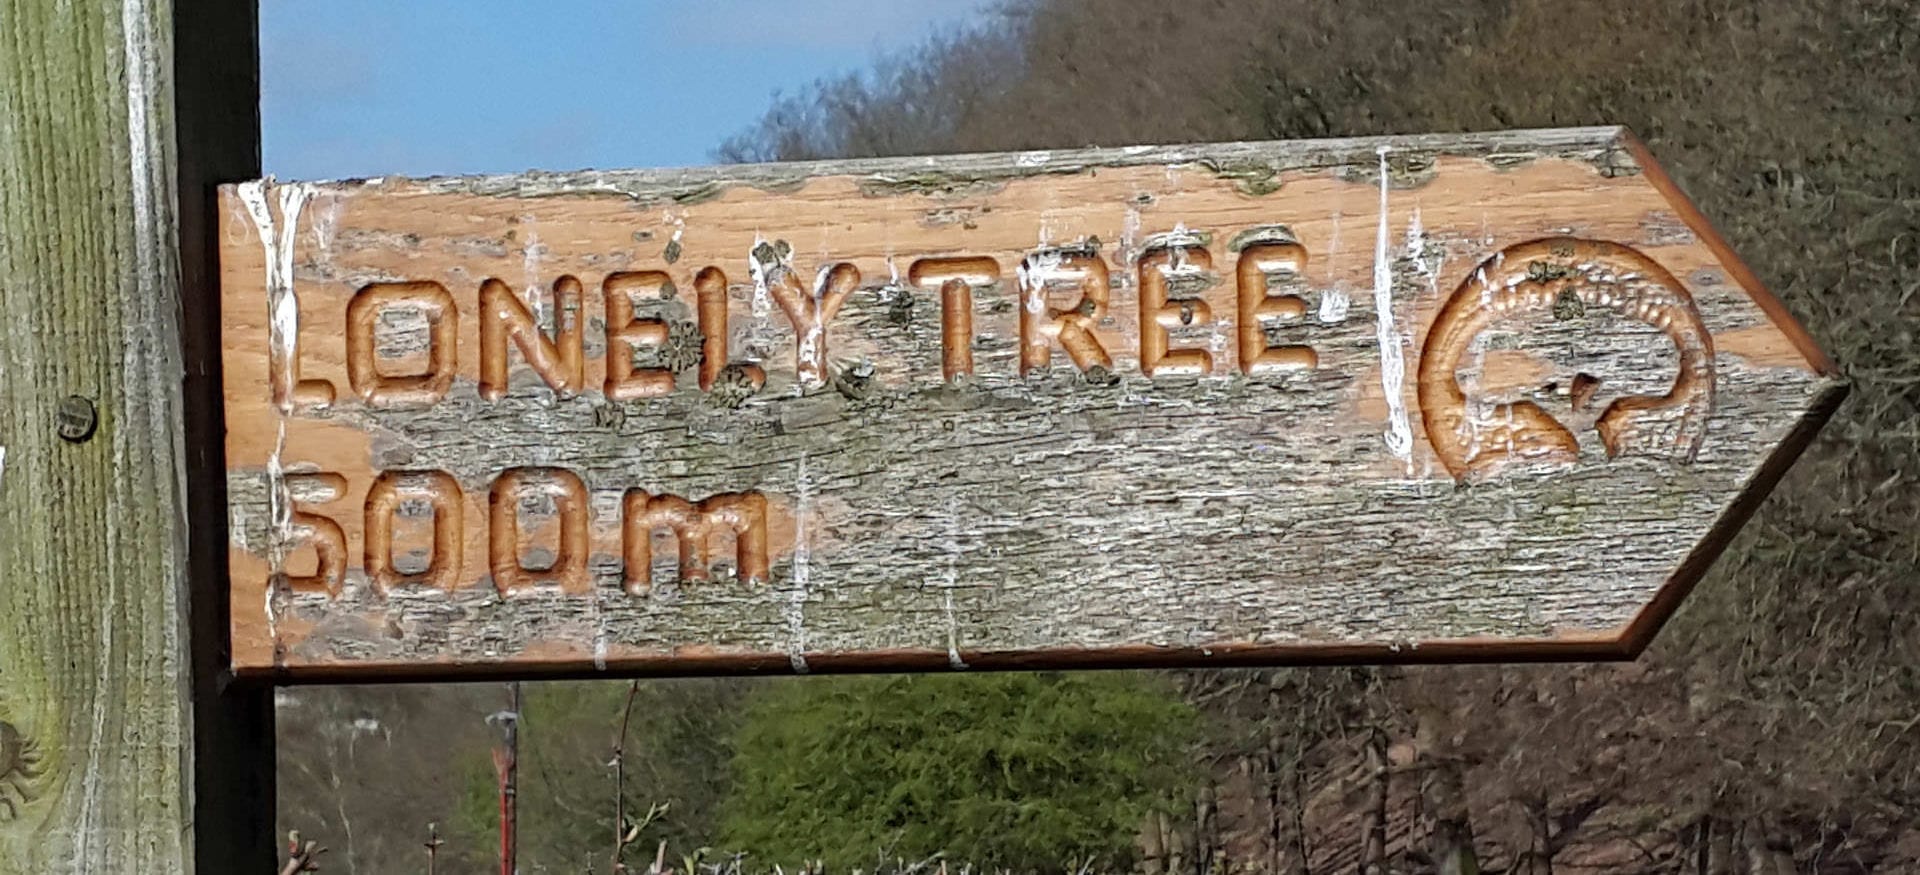 Llanfyllin lonely tree sign close to llanfyllin Workhouse Bunkhouse